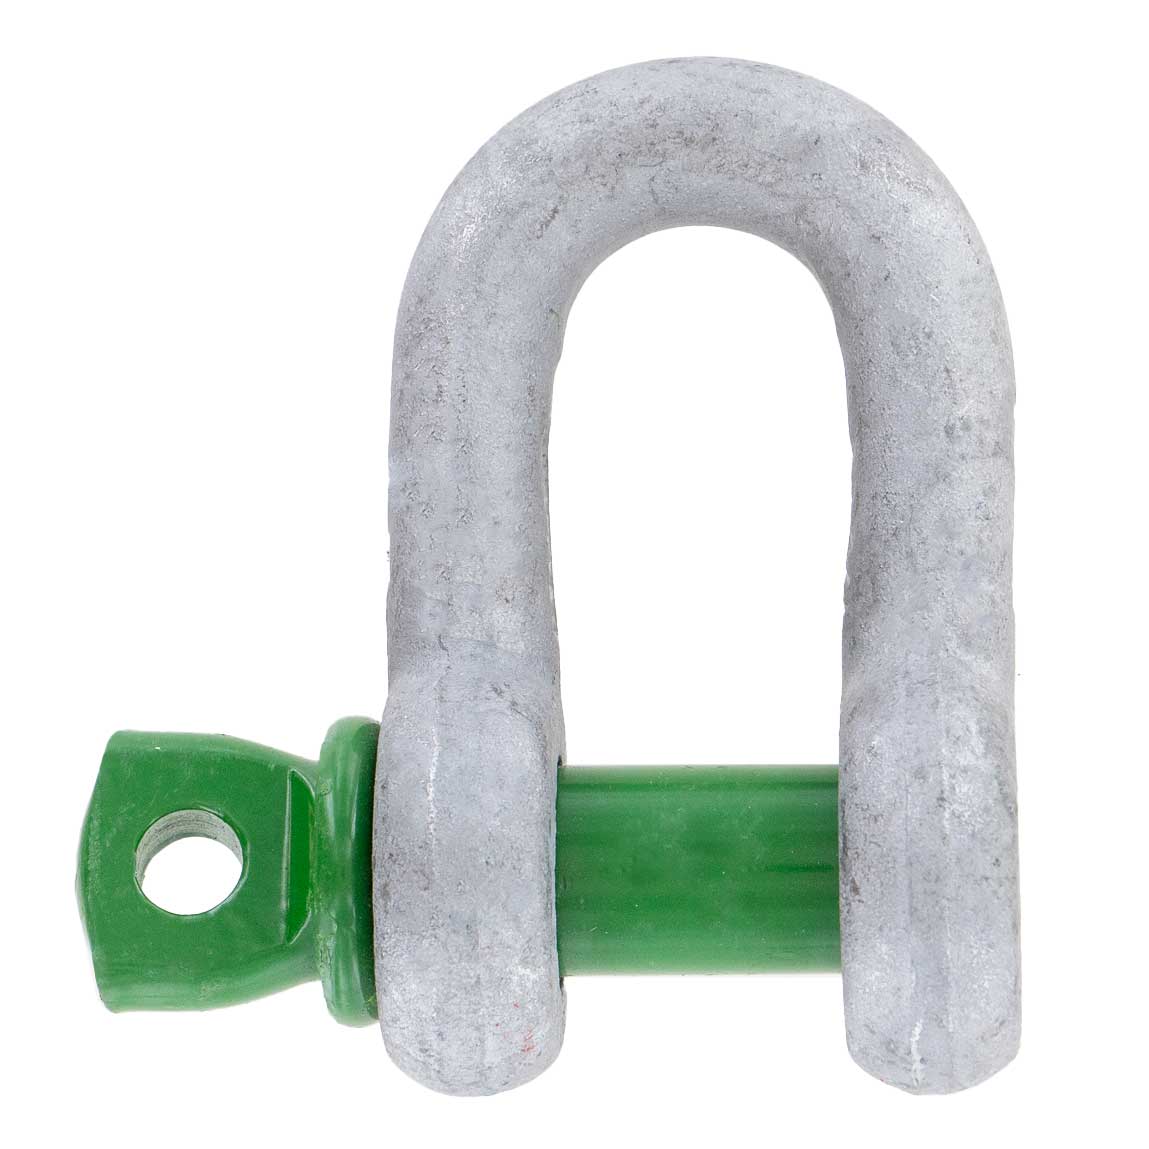 1-1/8" Van Beest Green Pin® Screw Pin Chain Shackle | G-4151 - 9.5 Ton rear view